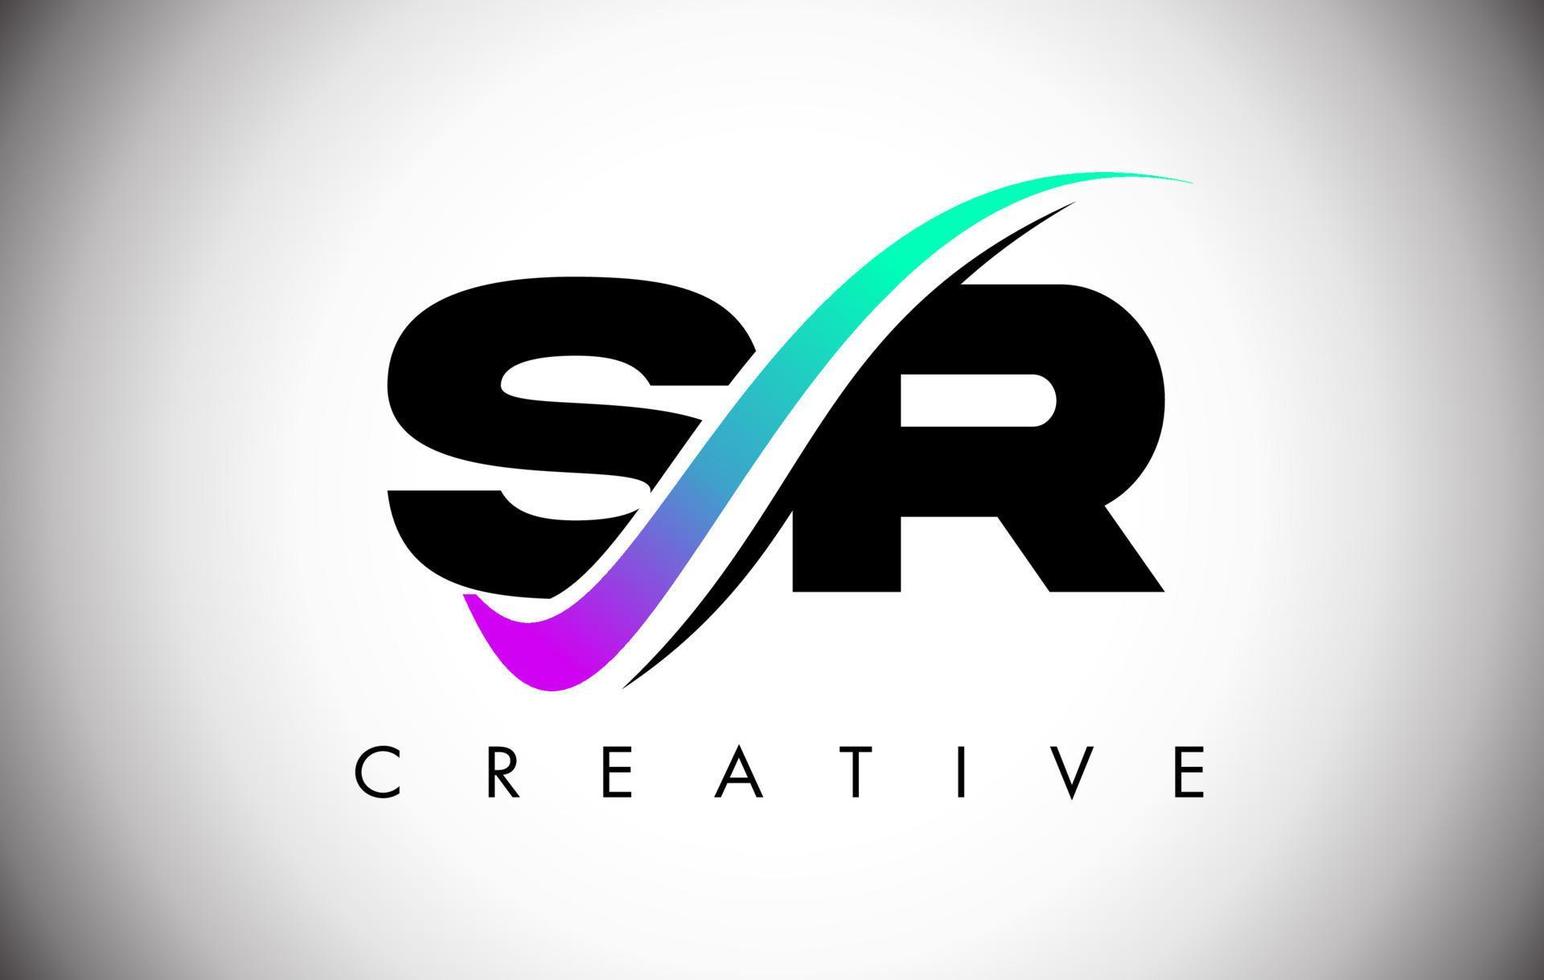 SR Letter Logo with Creative Swoosh Curved Line and Bold Font and Vibrant Colors vector